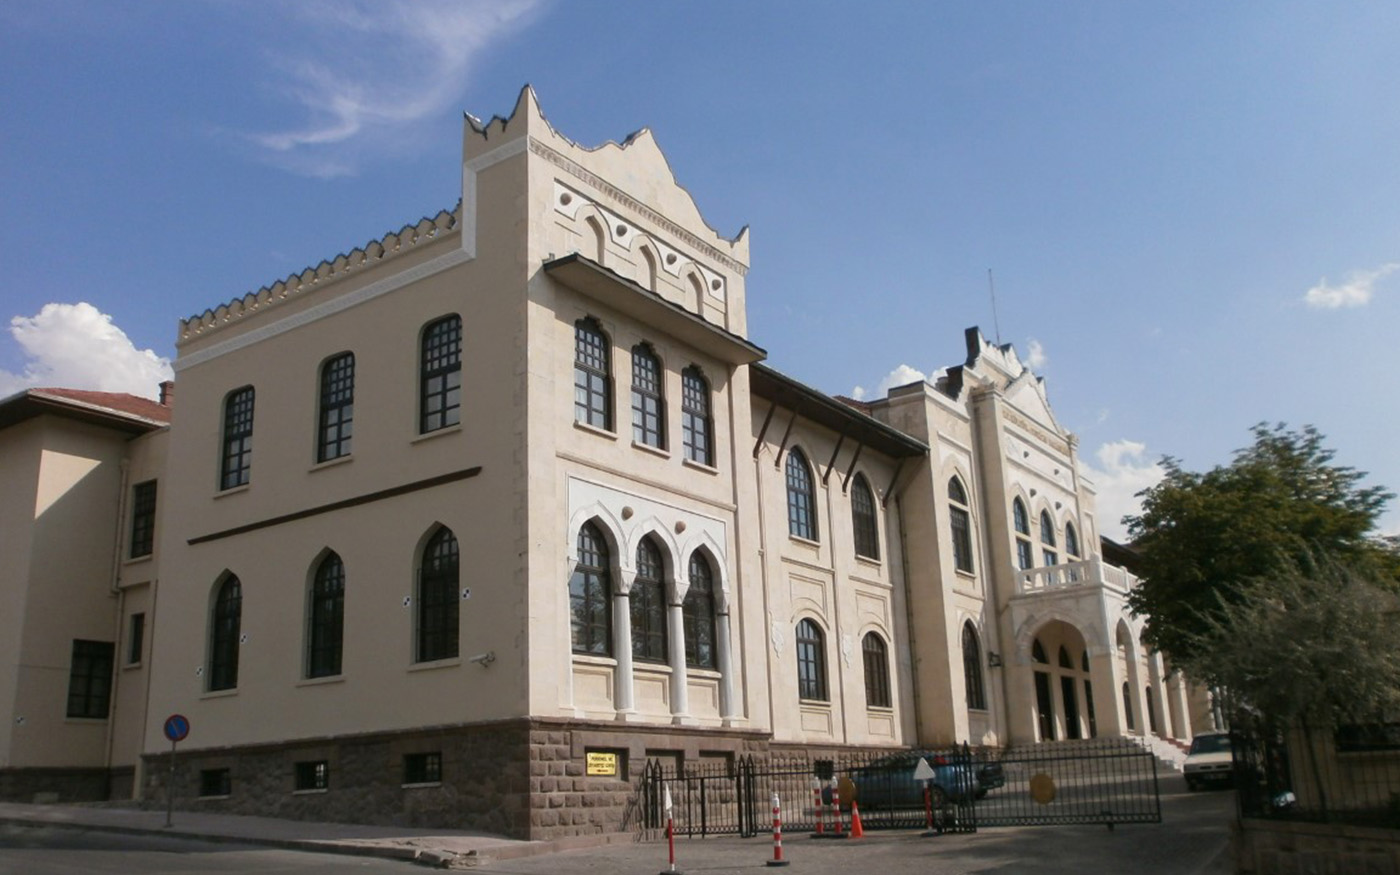 Ministry of Culture and Tourism Main Building